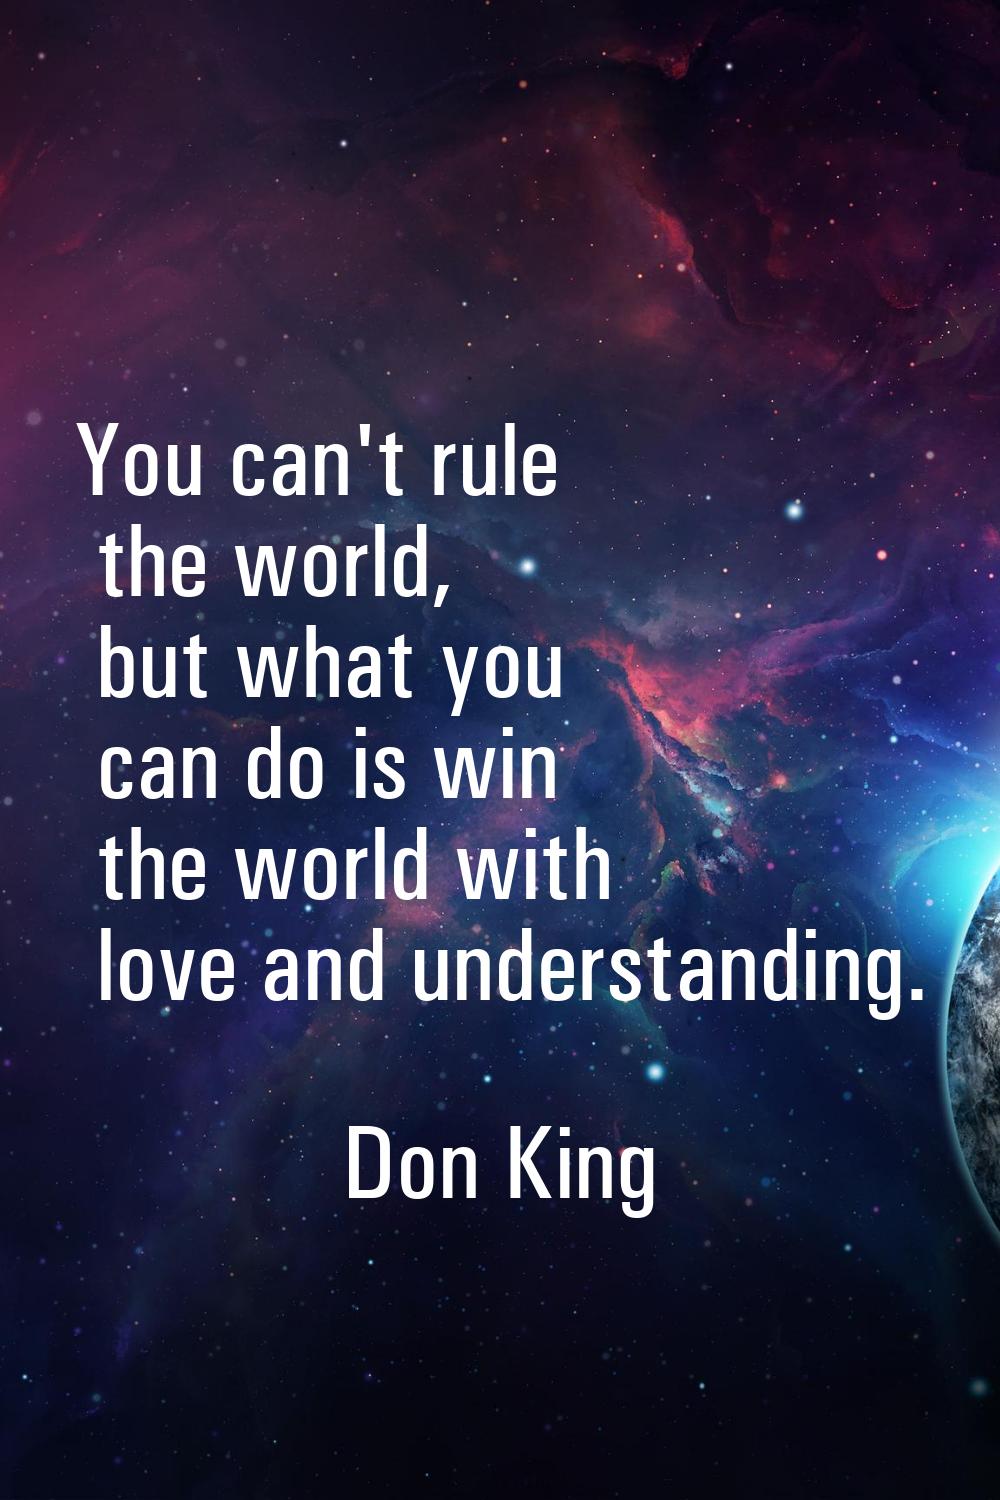 You can't rule the world, but what you can do is win the world with love and understanding.